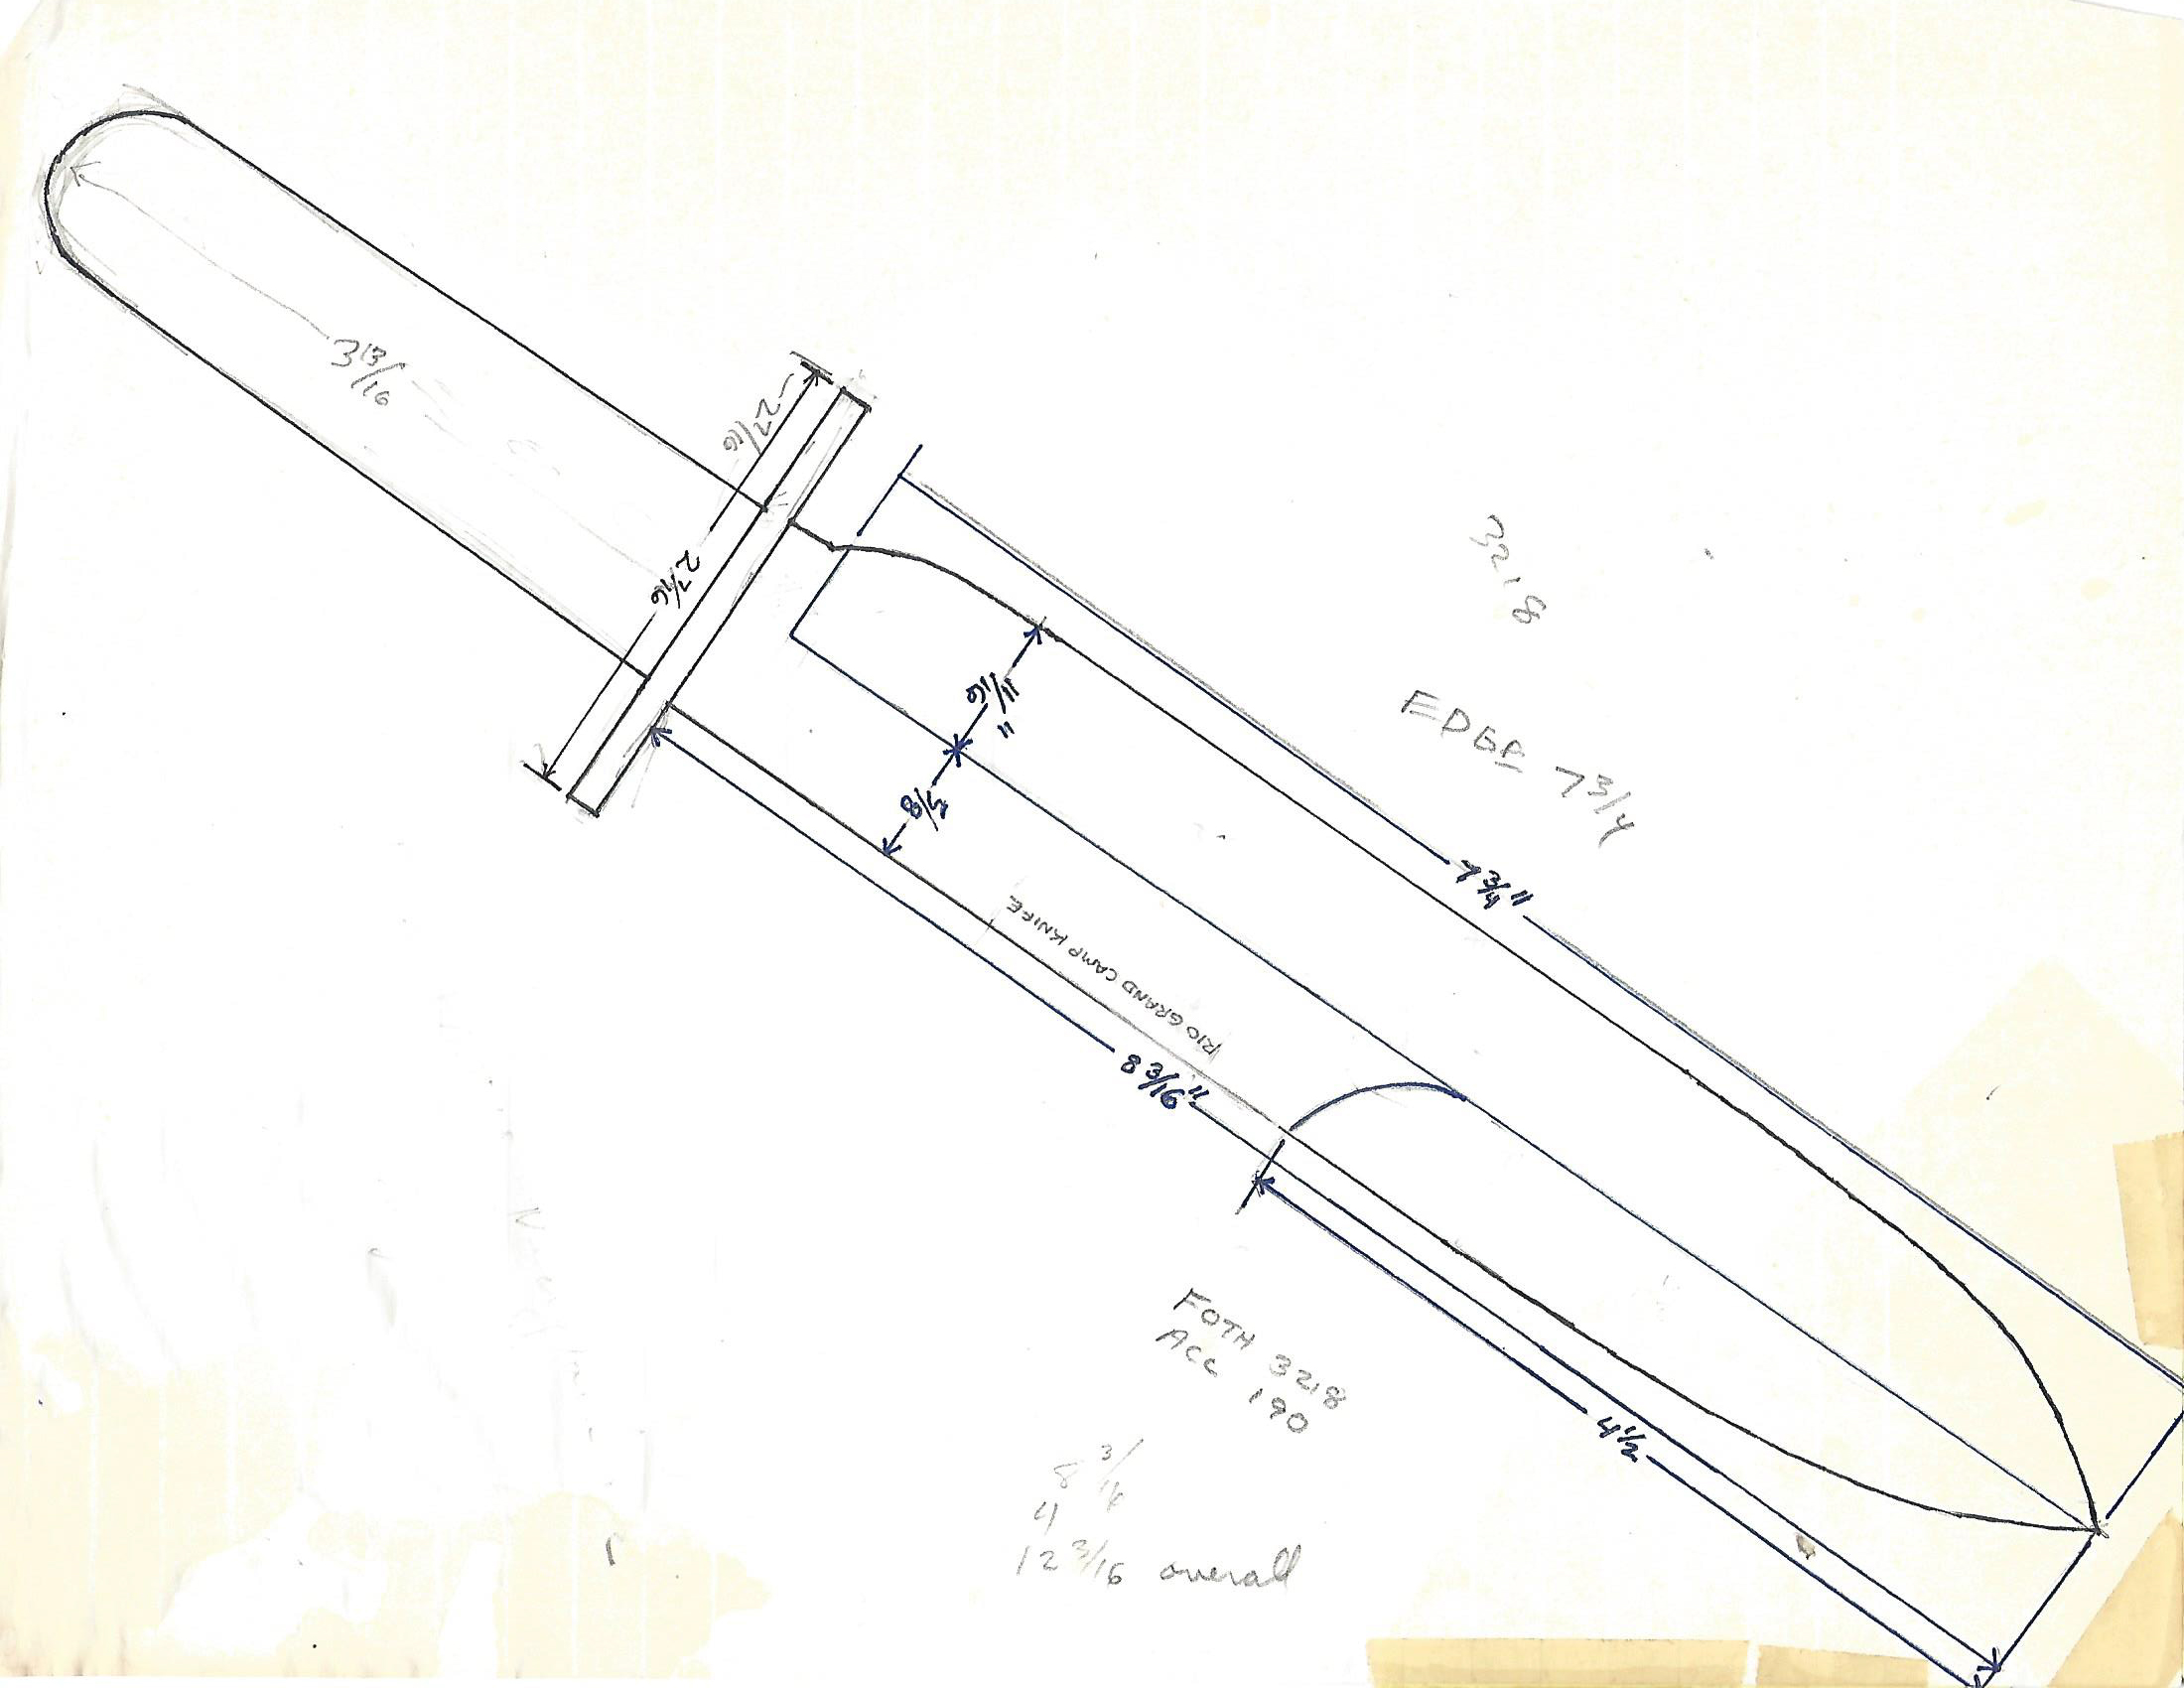 Sketch of the 3218 knife at its accession.